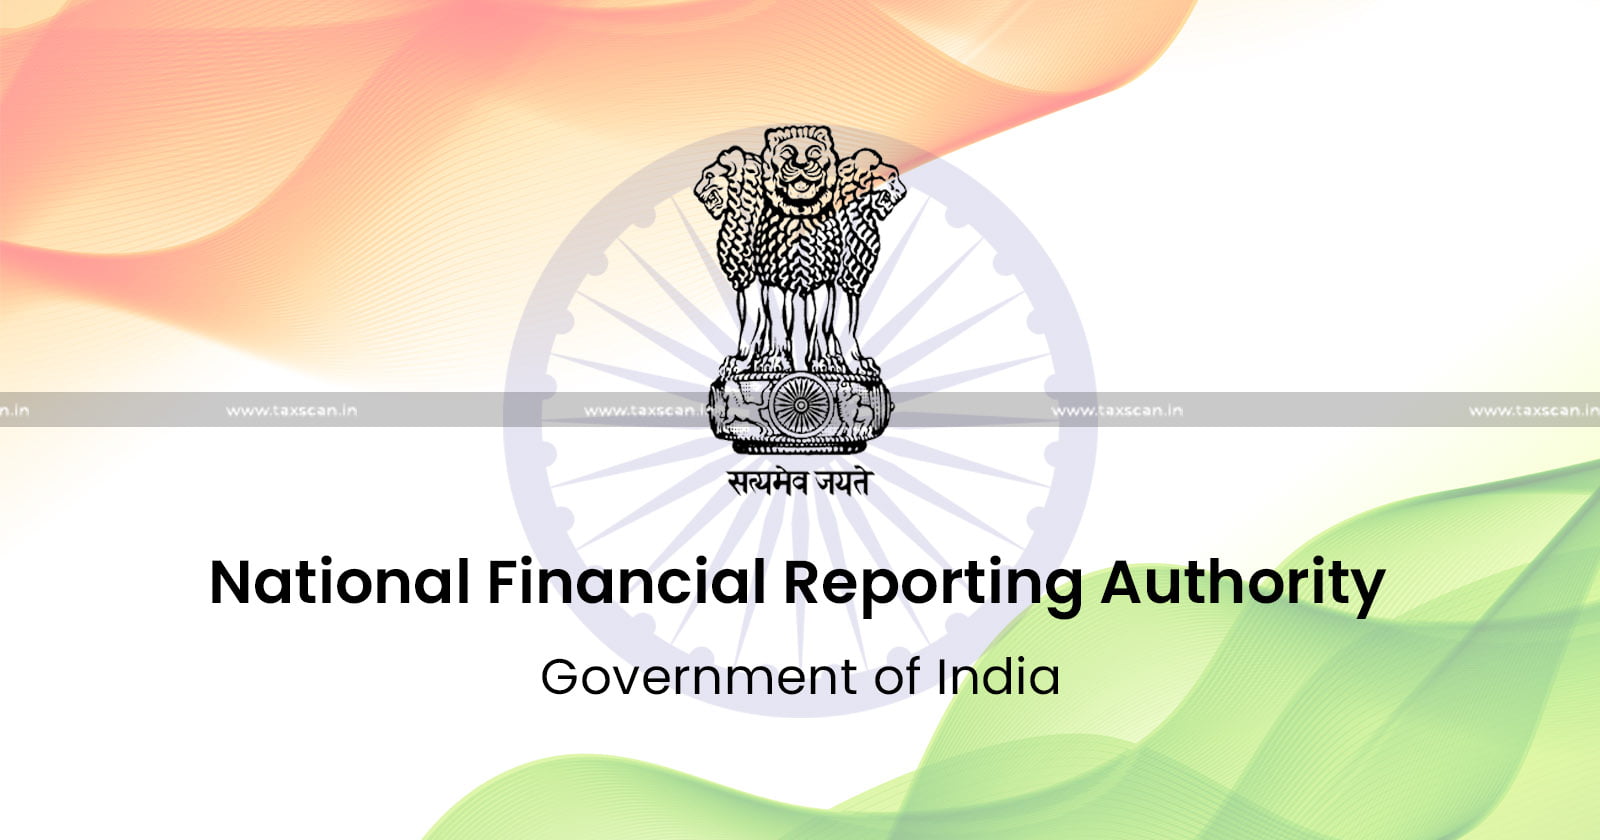 NFRA - ICAI - Audit Irregularities - RHFL - Professional misconduct - NFRA audit violations penalty - taxscan